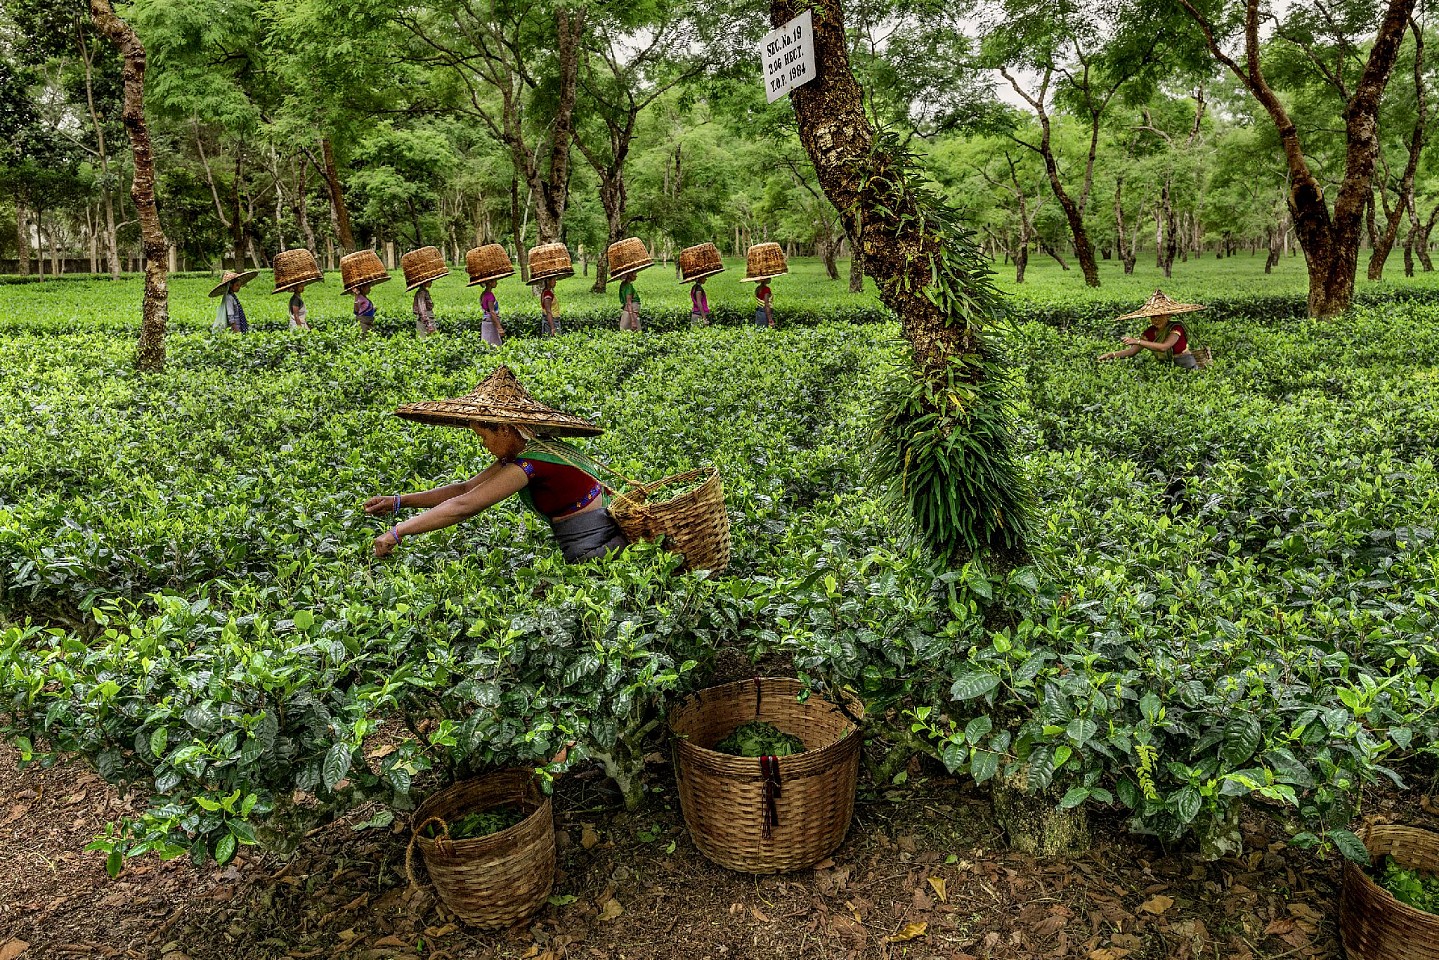 Steve McCurry, Tea Pickers in Assam, 2019
FujiFlex Crystal Archive Print
Price/Size on request